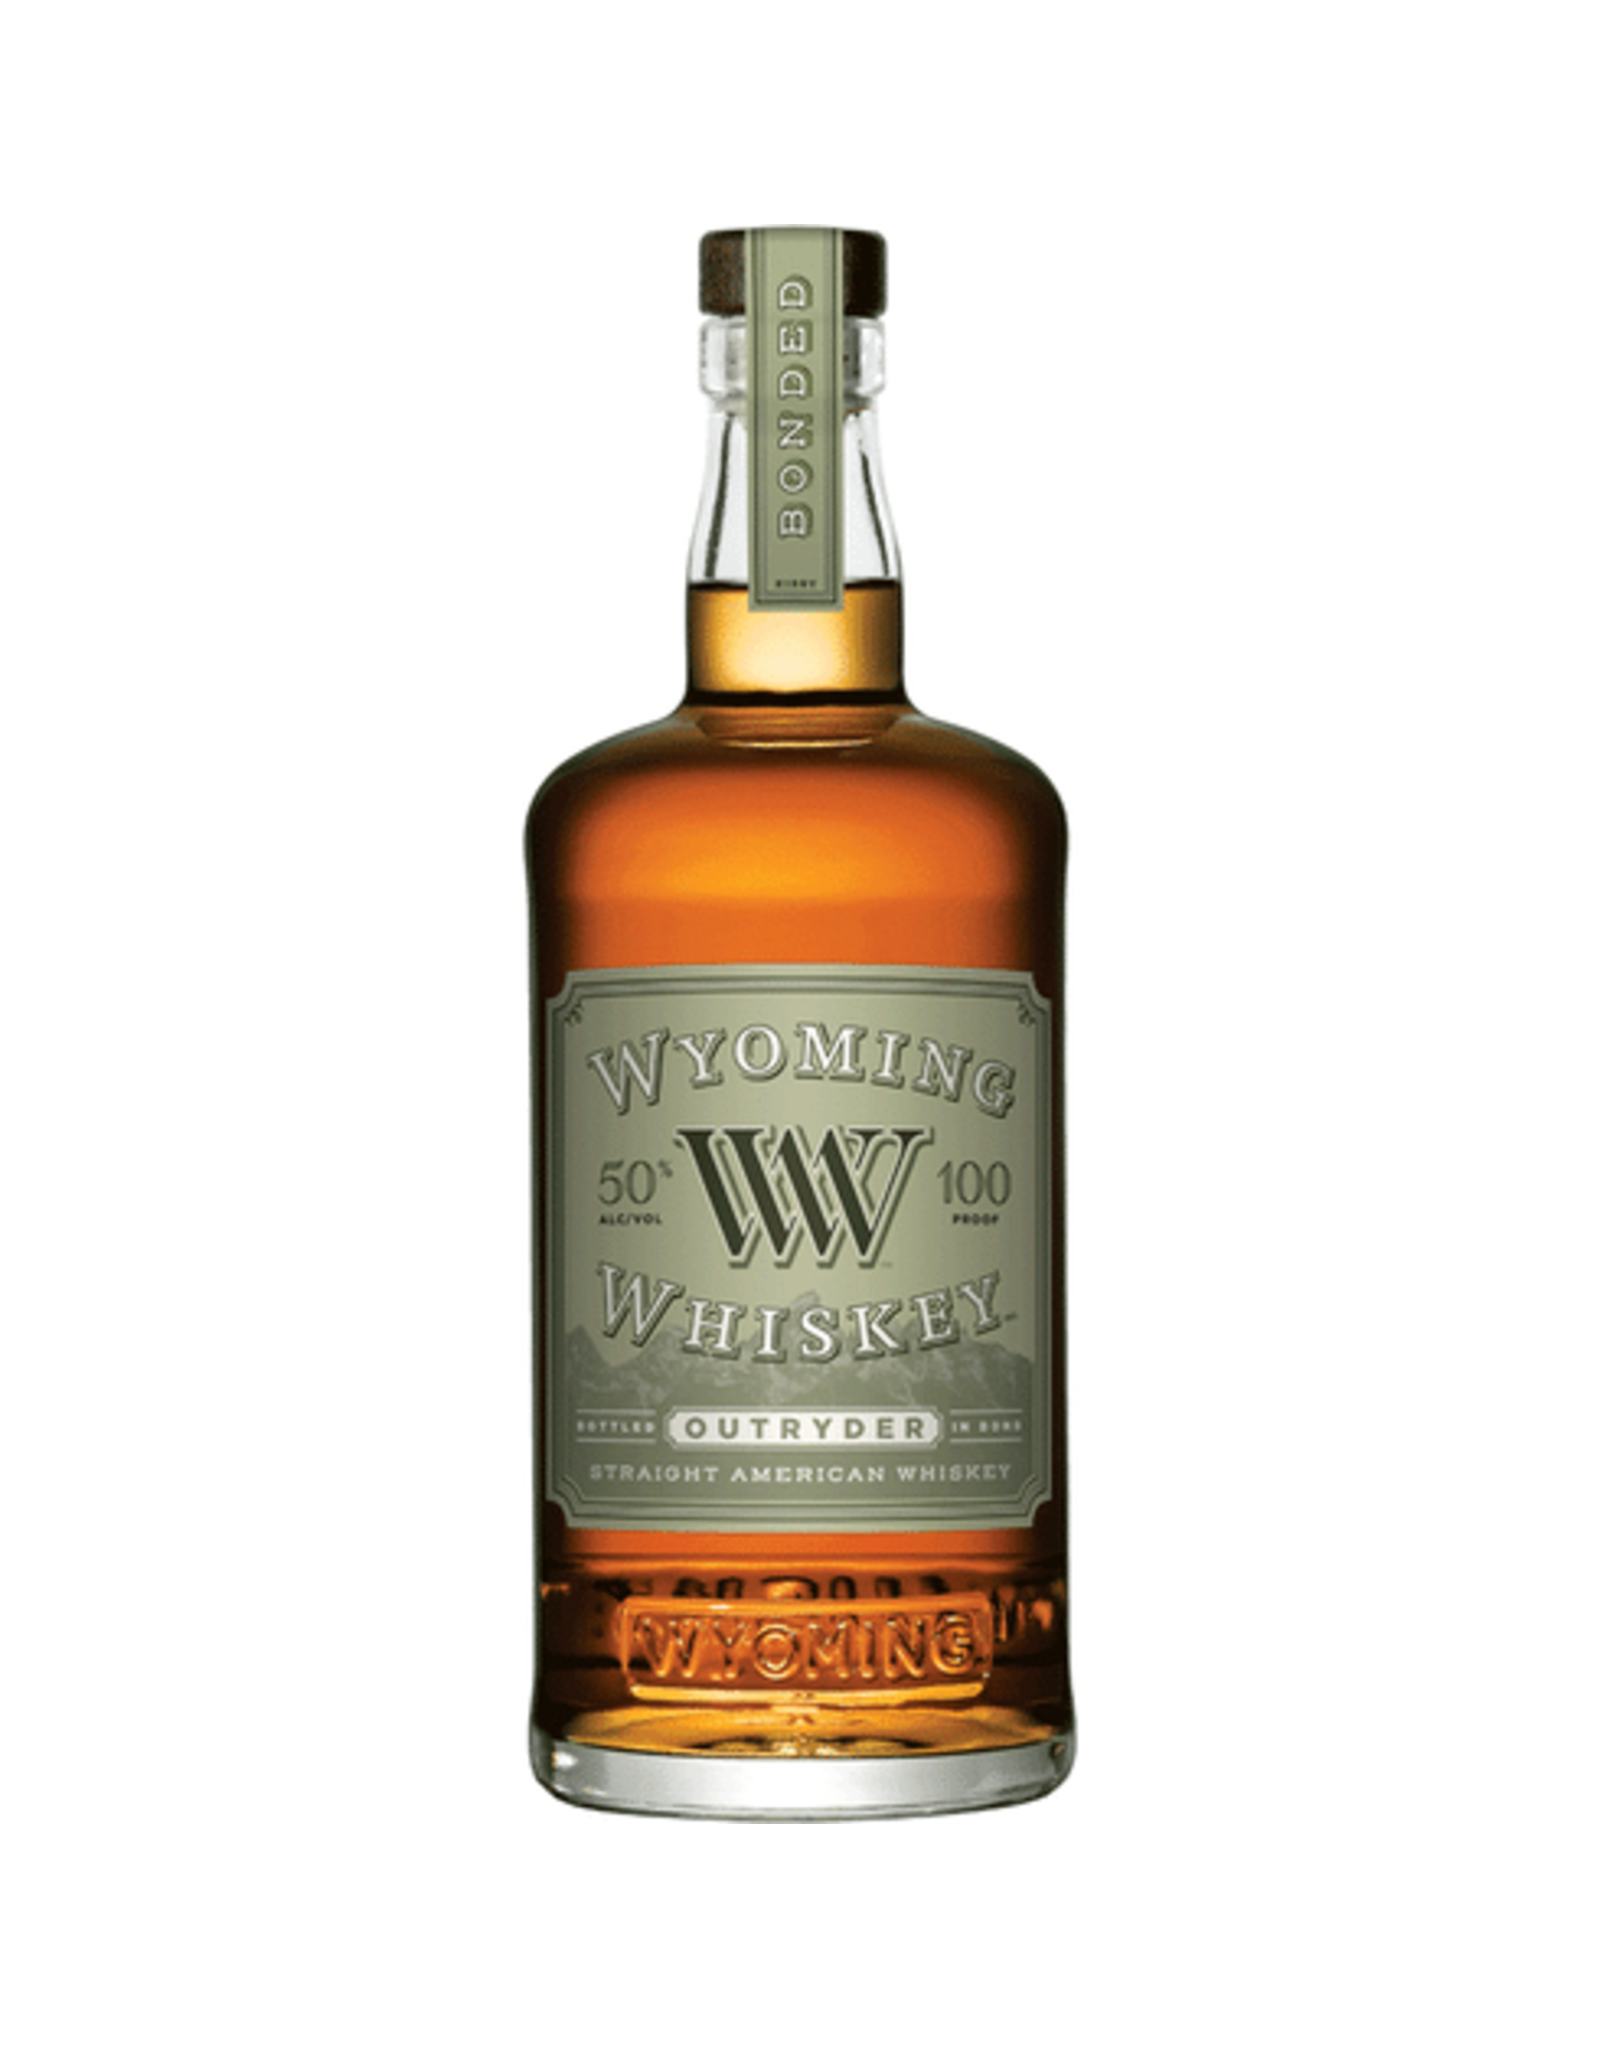 Wyoming Outryder American Straight Whiskey